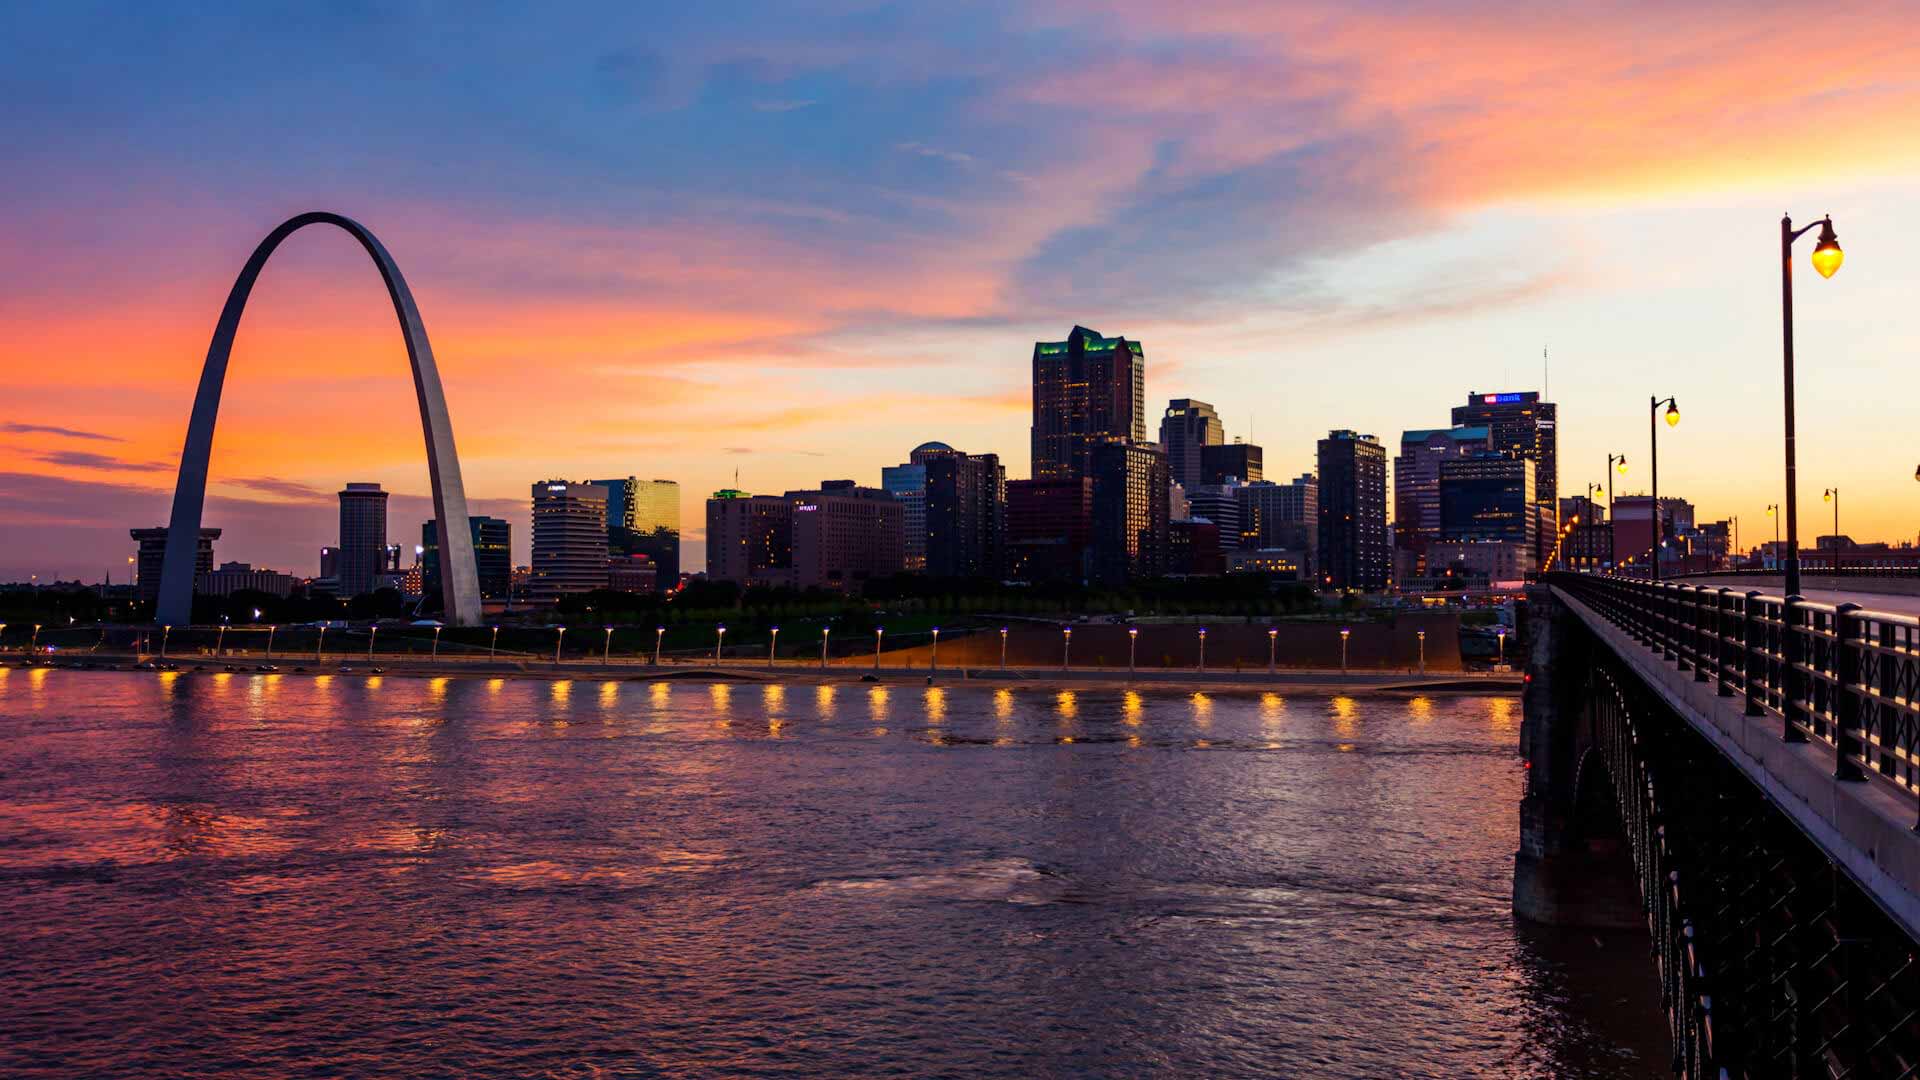 St Louis skyline over the river at sunset